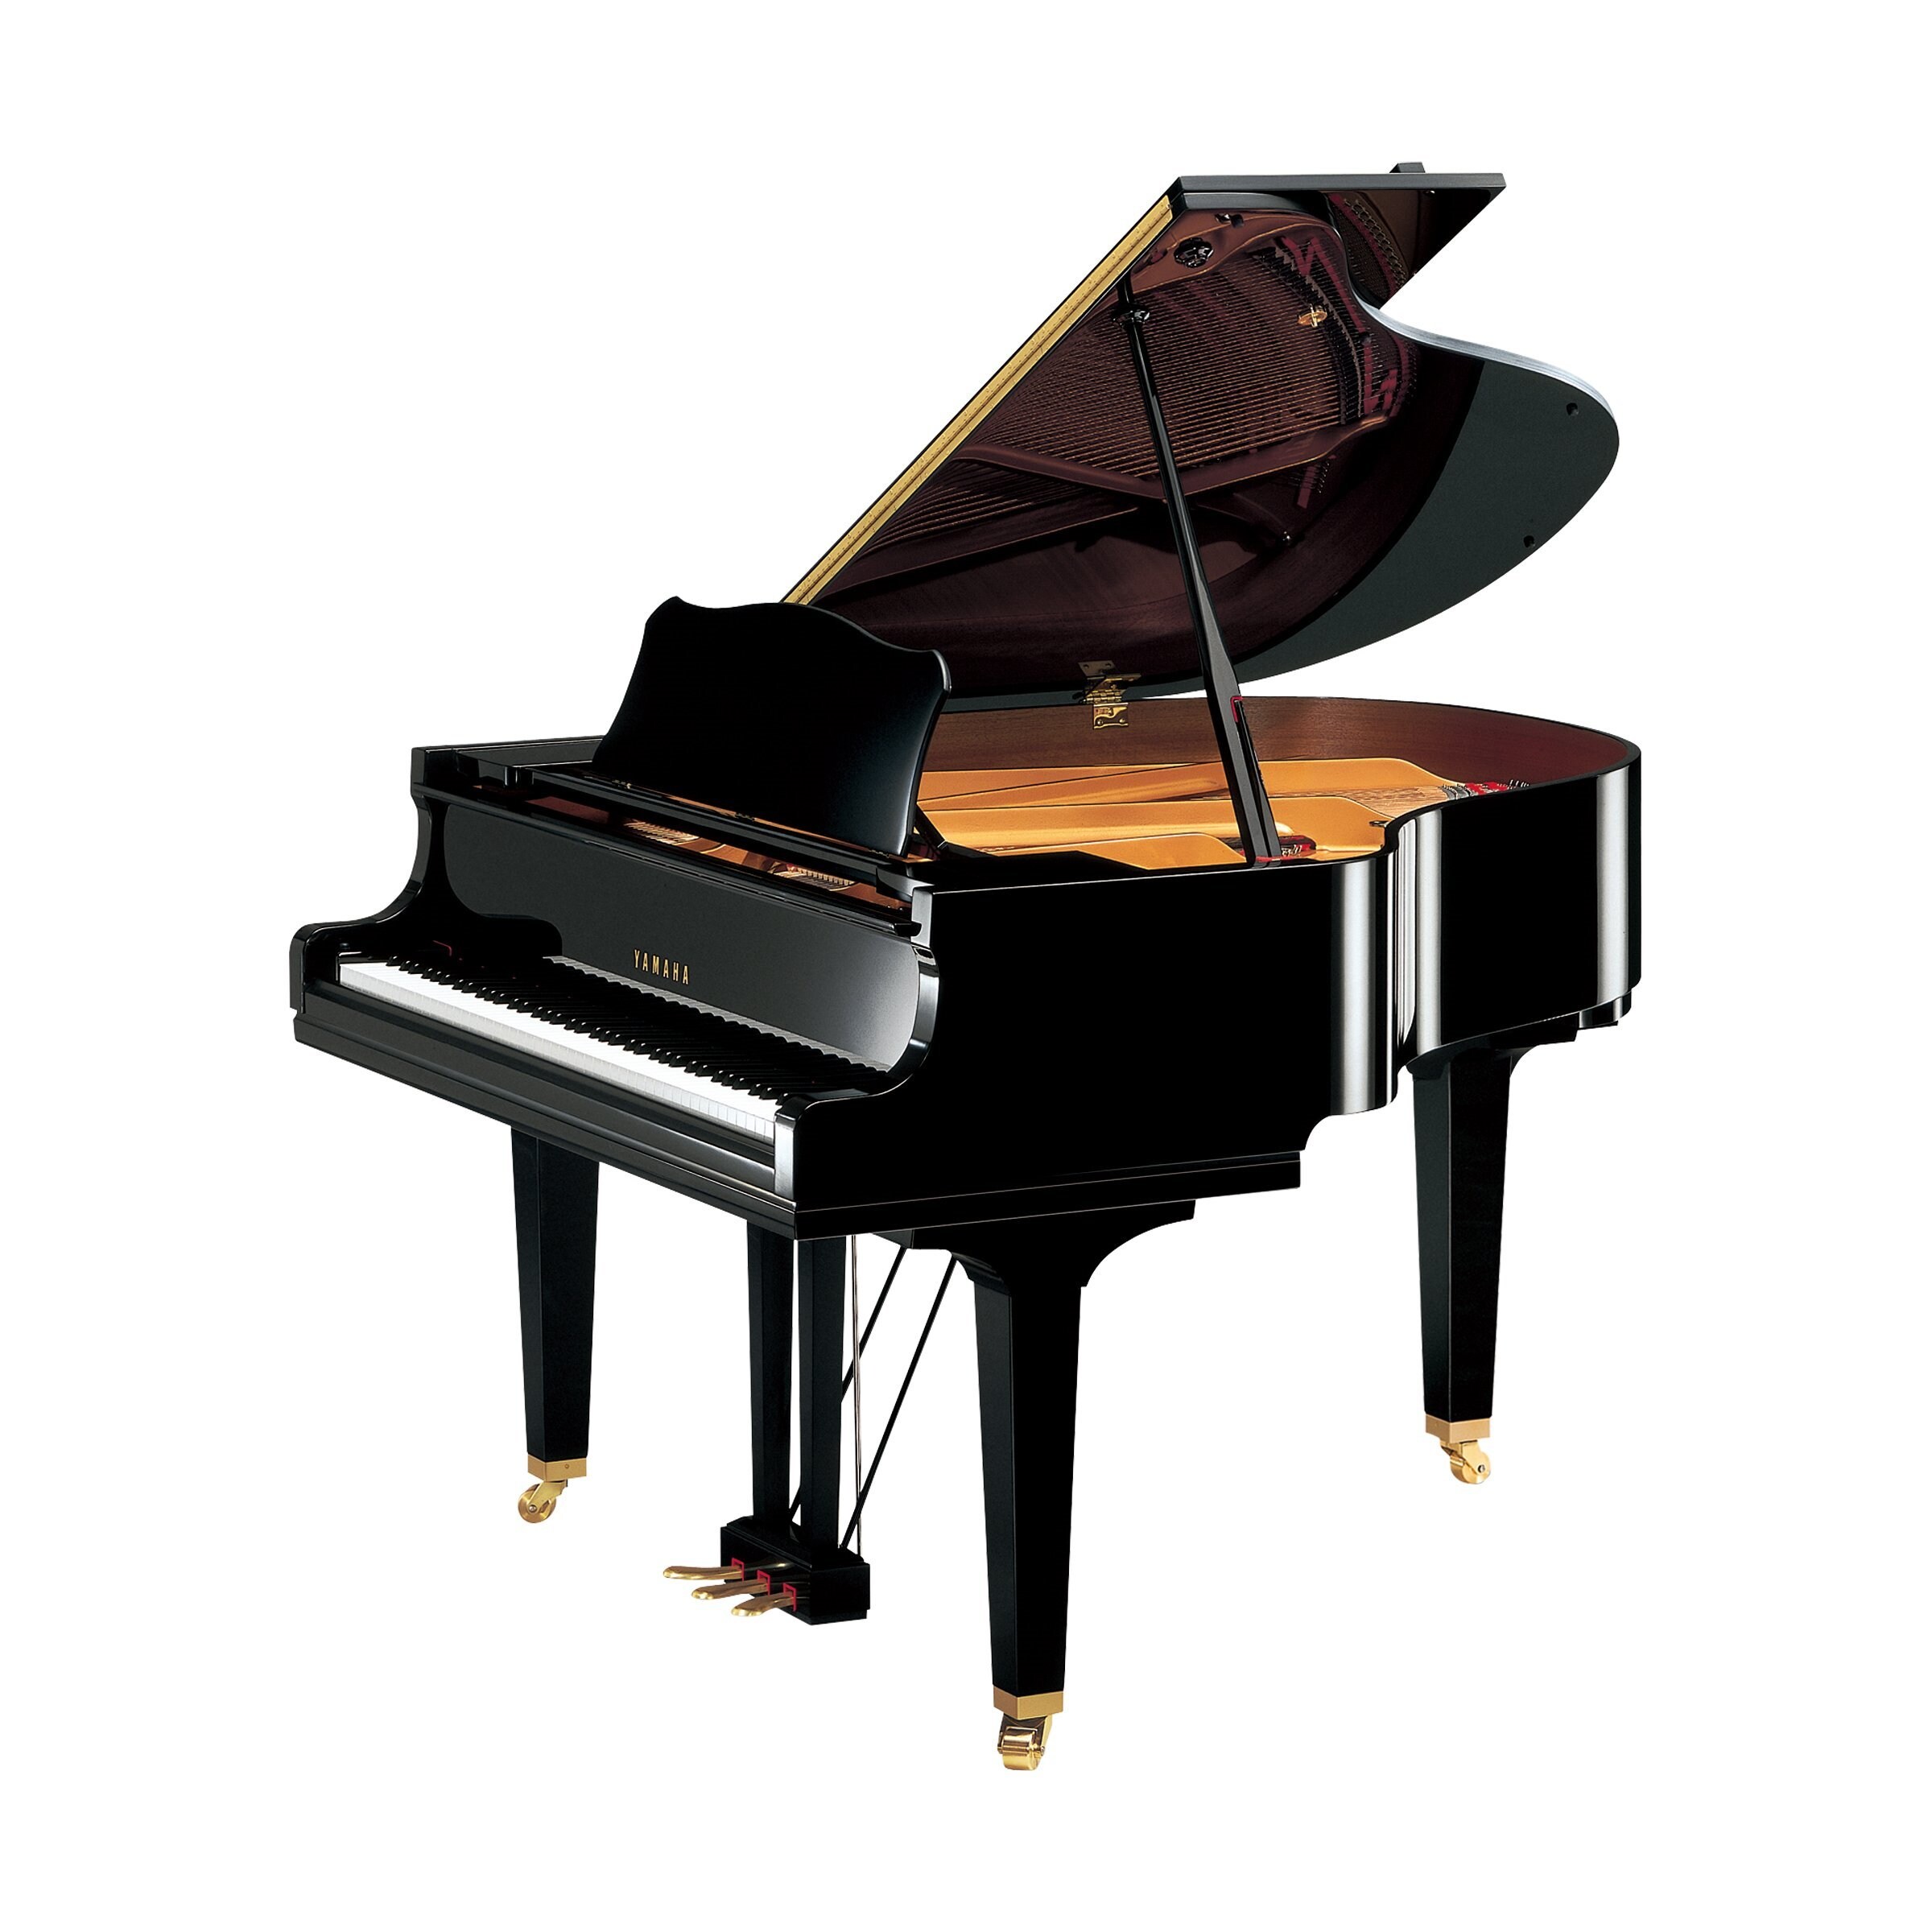 GC Series - Overview - GRAND PIANOS - Pianos - Musical Instruments -  Products - Yamaha USA